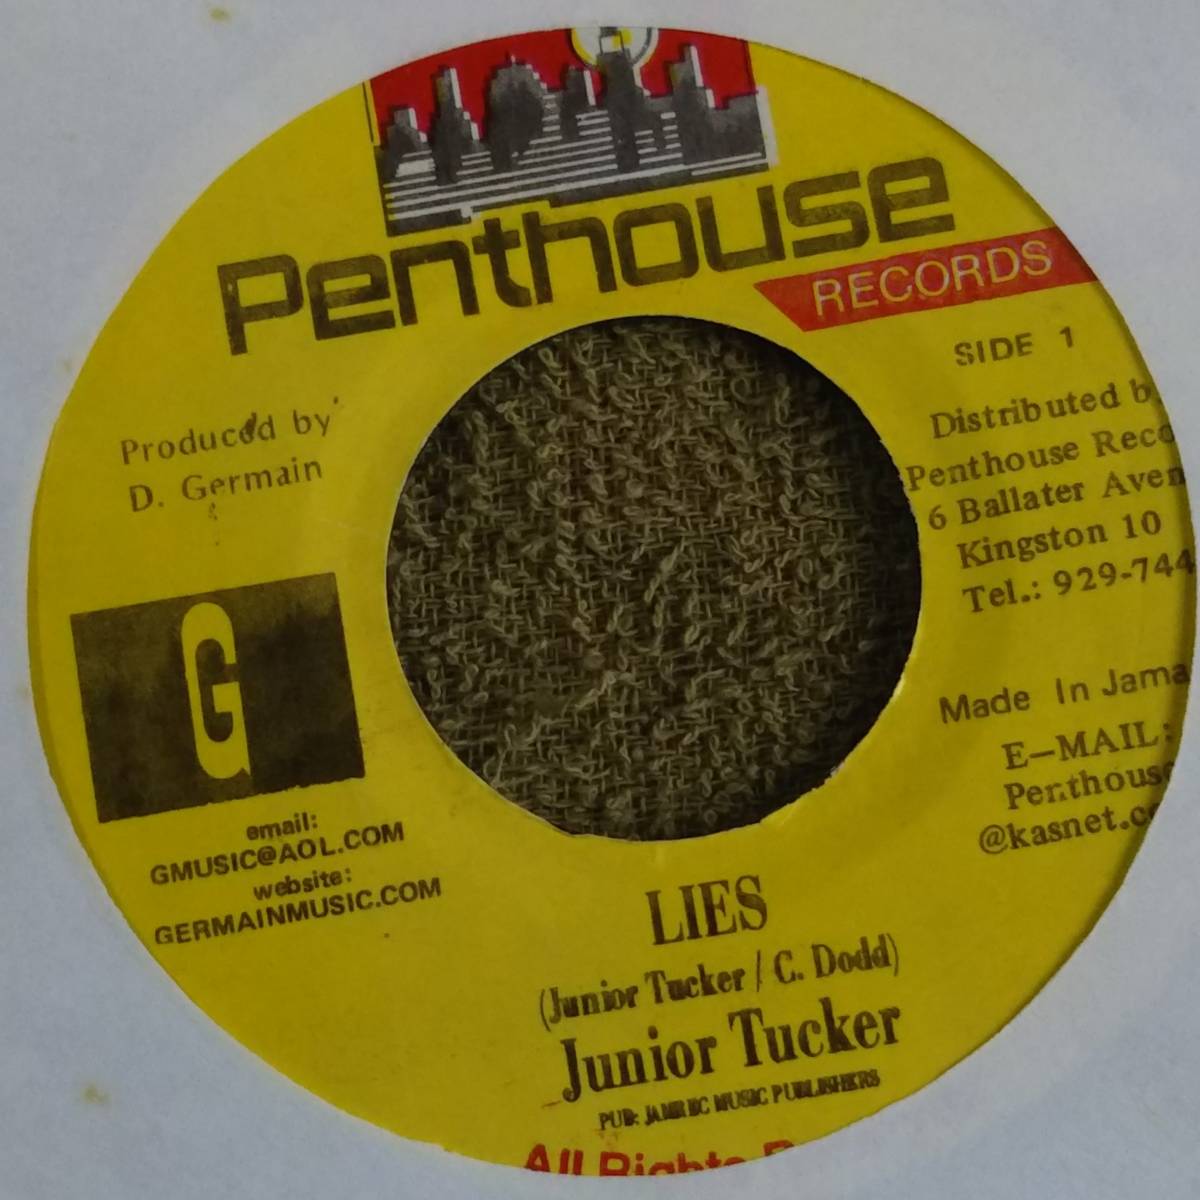 Try A Little Smile Riddim Lies Junior Tucker from Penthouse_画像1